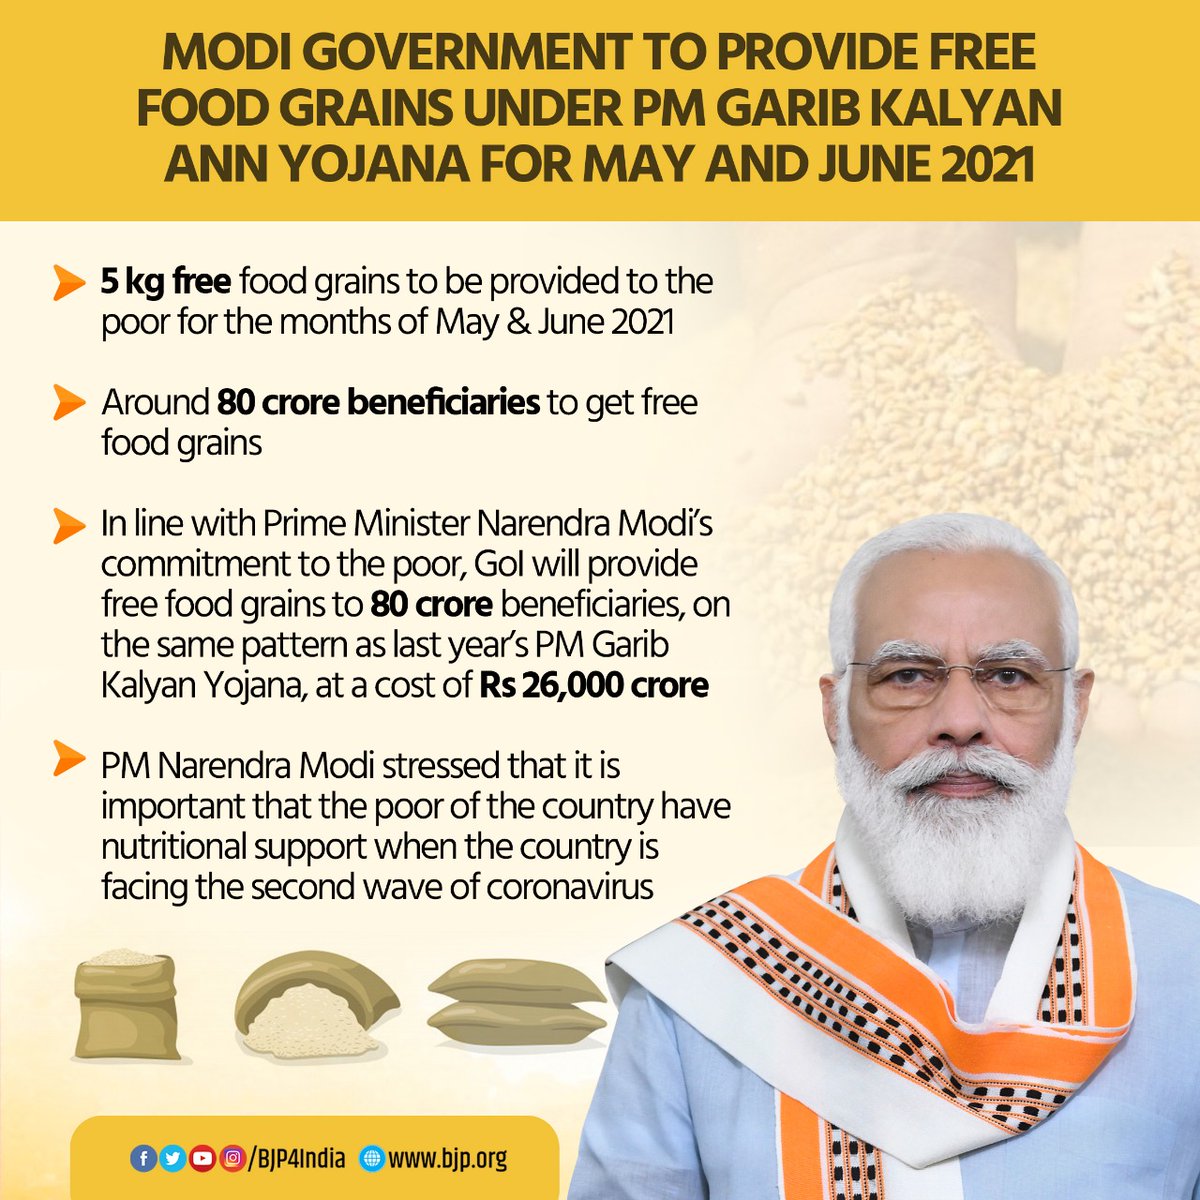 5. GOI to provide free food grains under PM Garib Kalyan Ann Yojana for May & June 20215 kg free food grains to be provided to the poorAround 80 crore beneficiaries to get free food grains. GOI would spend more than Rs 26,000 crore on this initiative #MODIBJPSavingLives